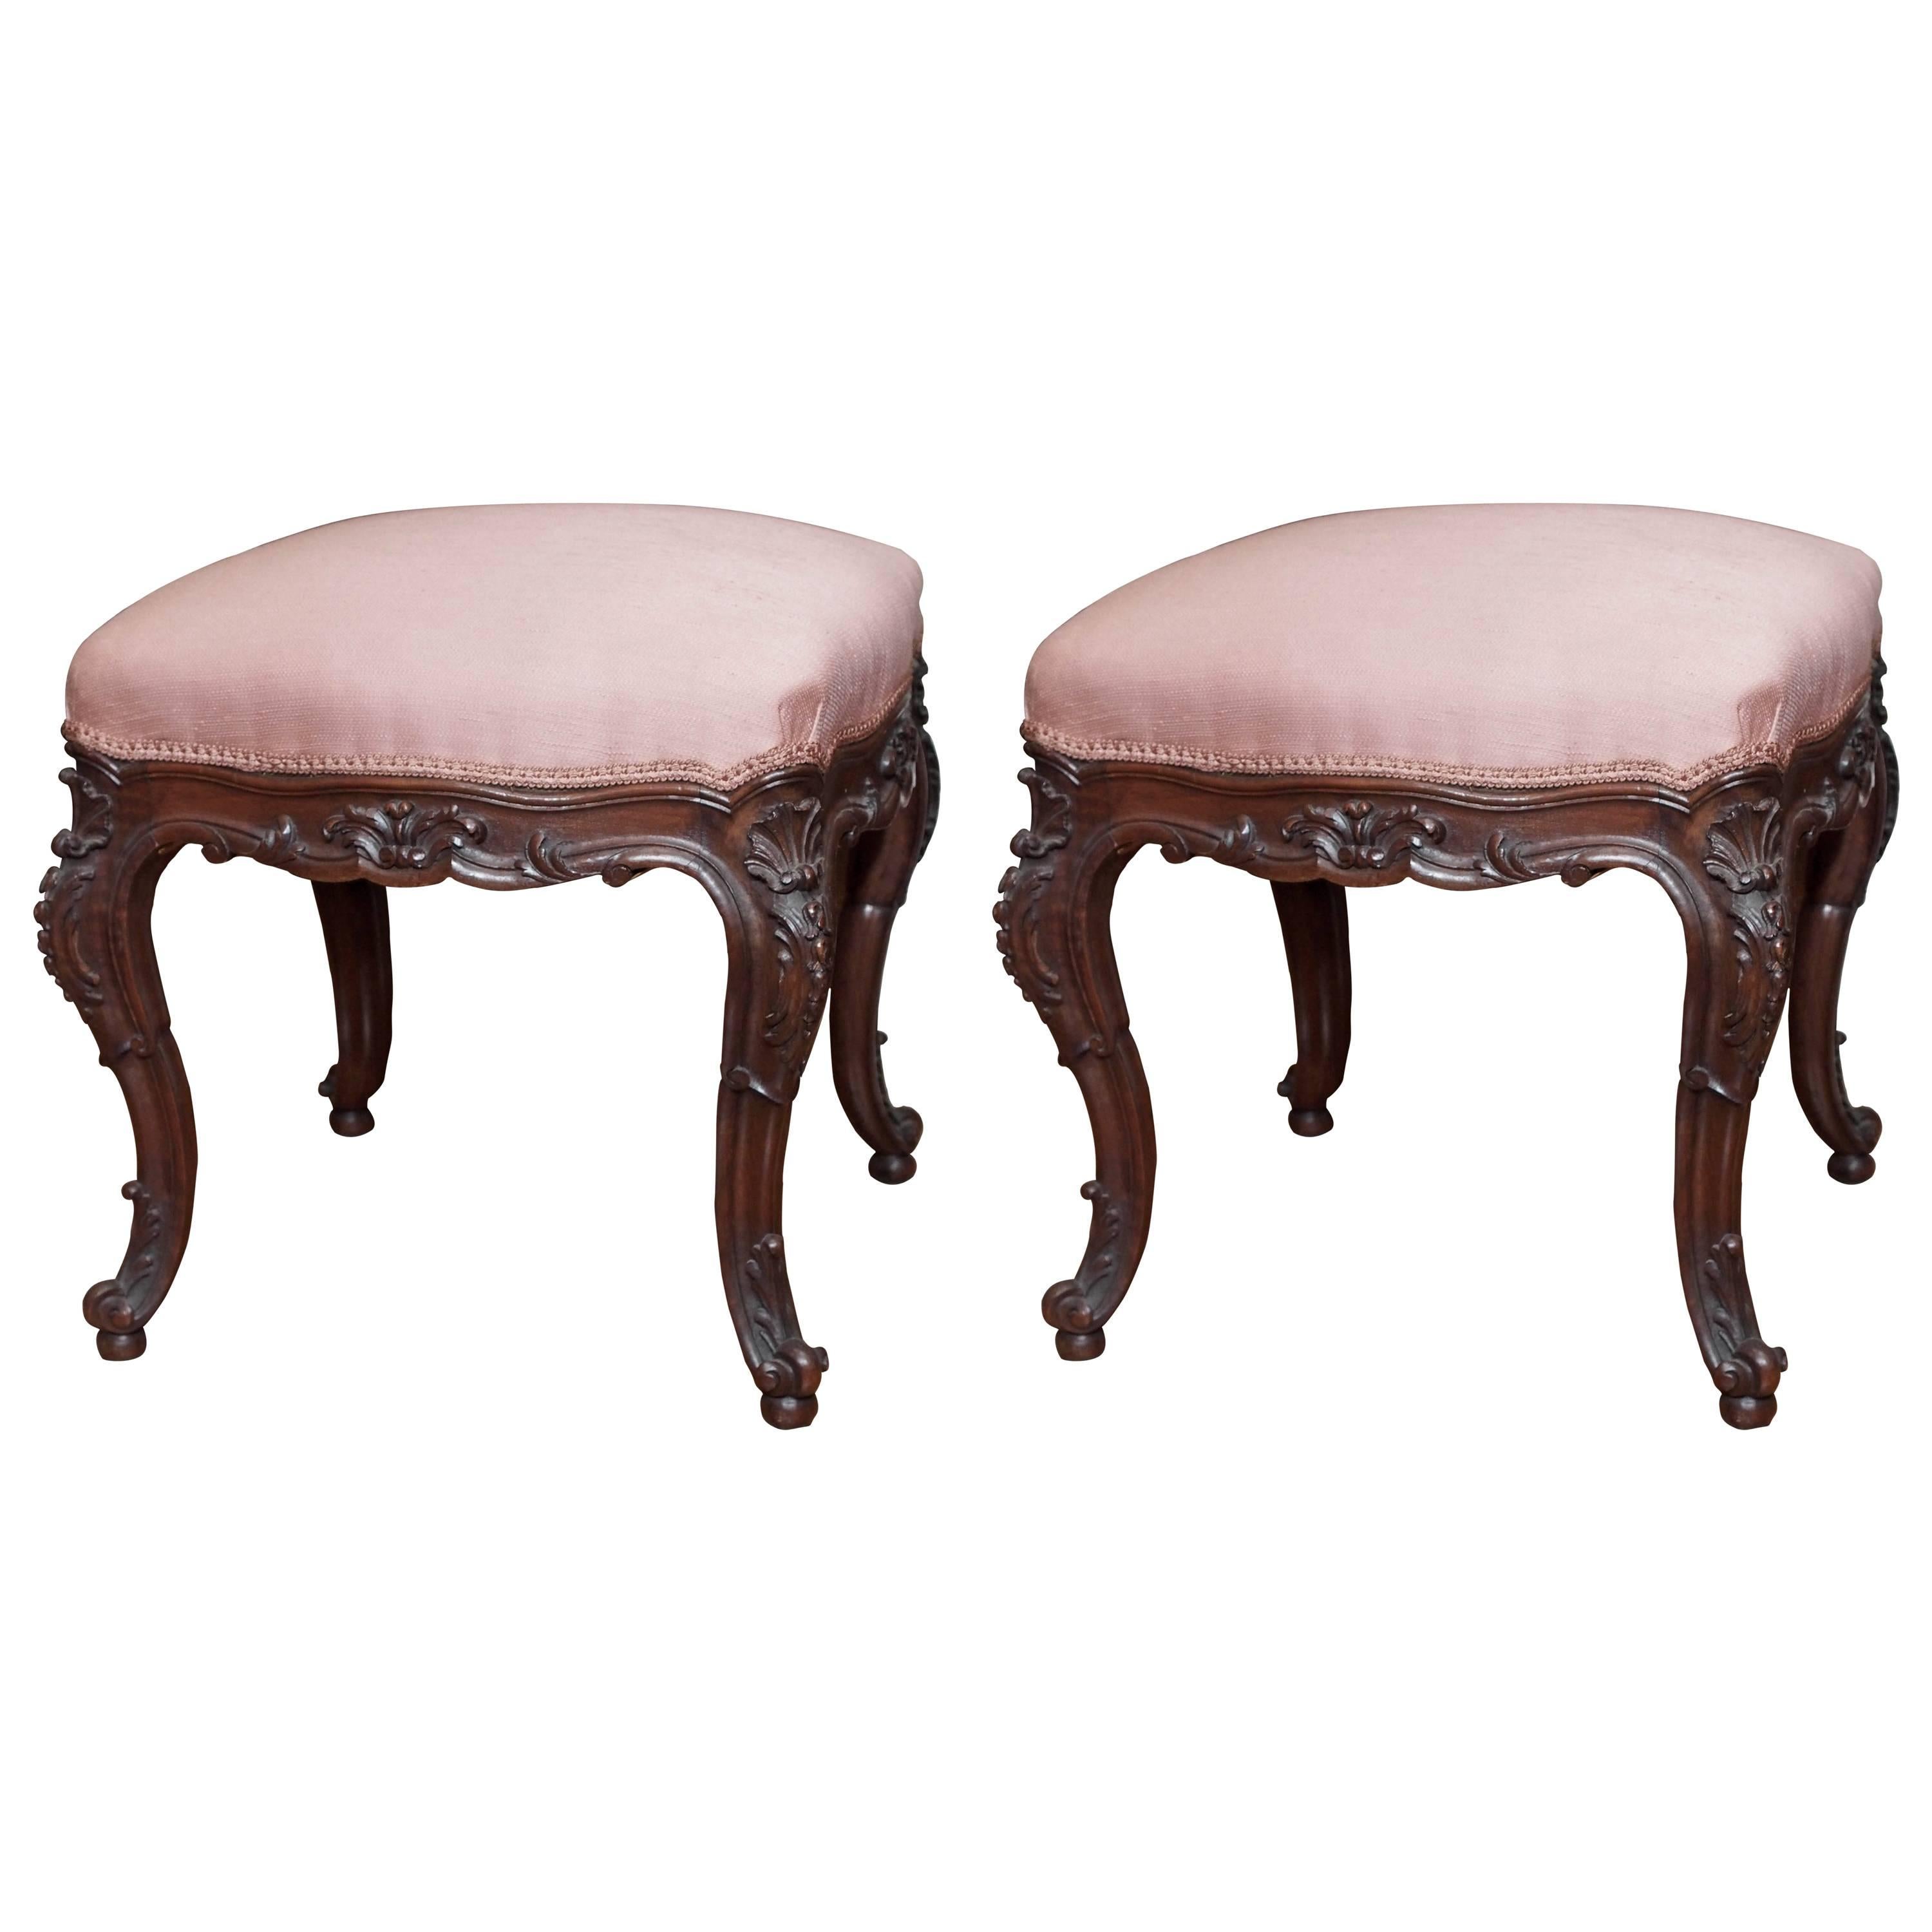 Pair of Louis XV Style Stools in Walnut